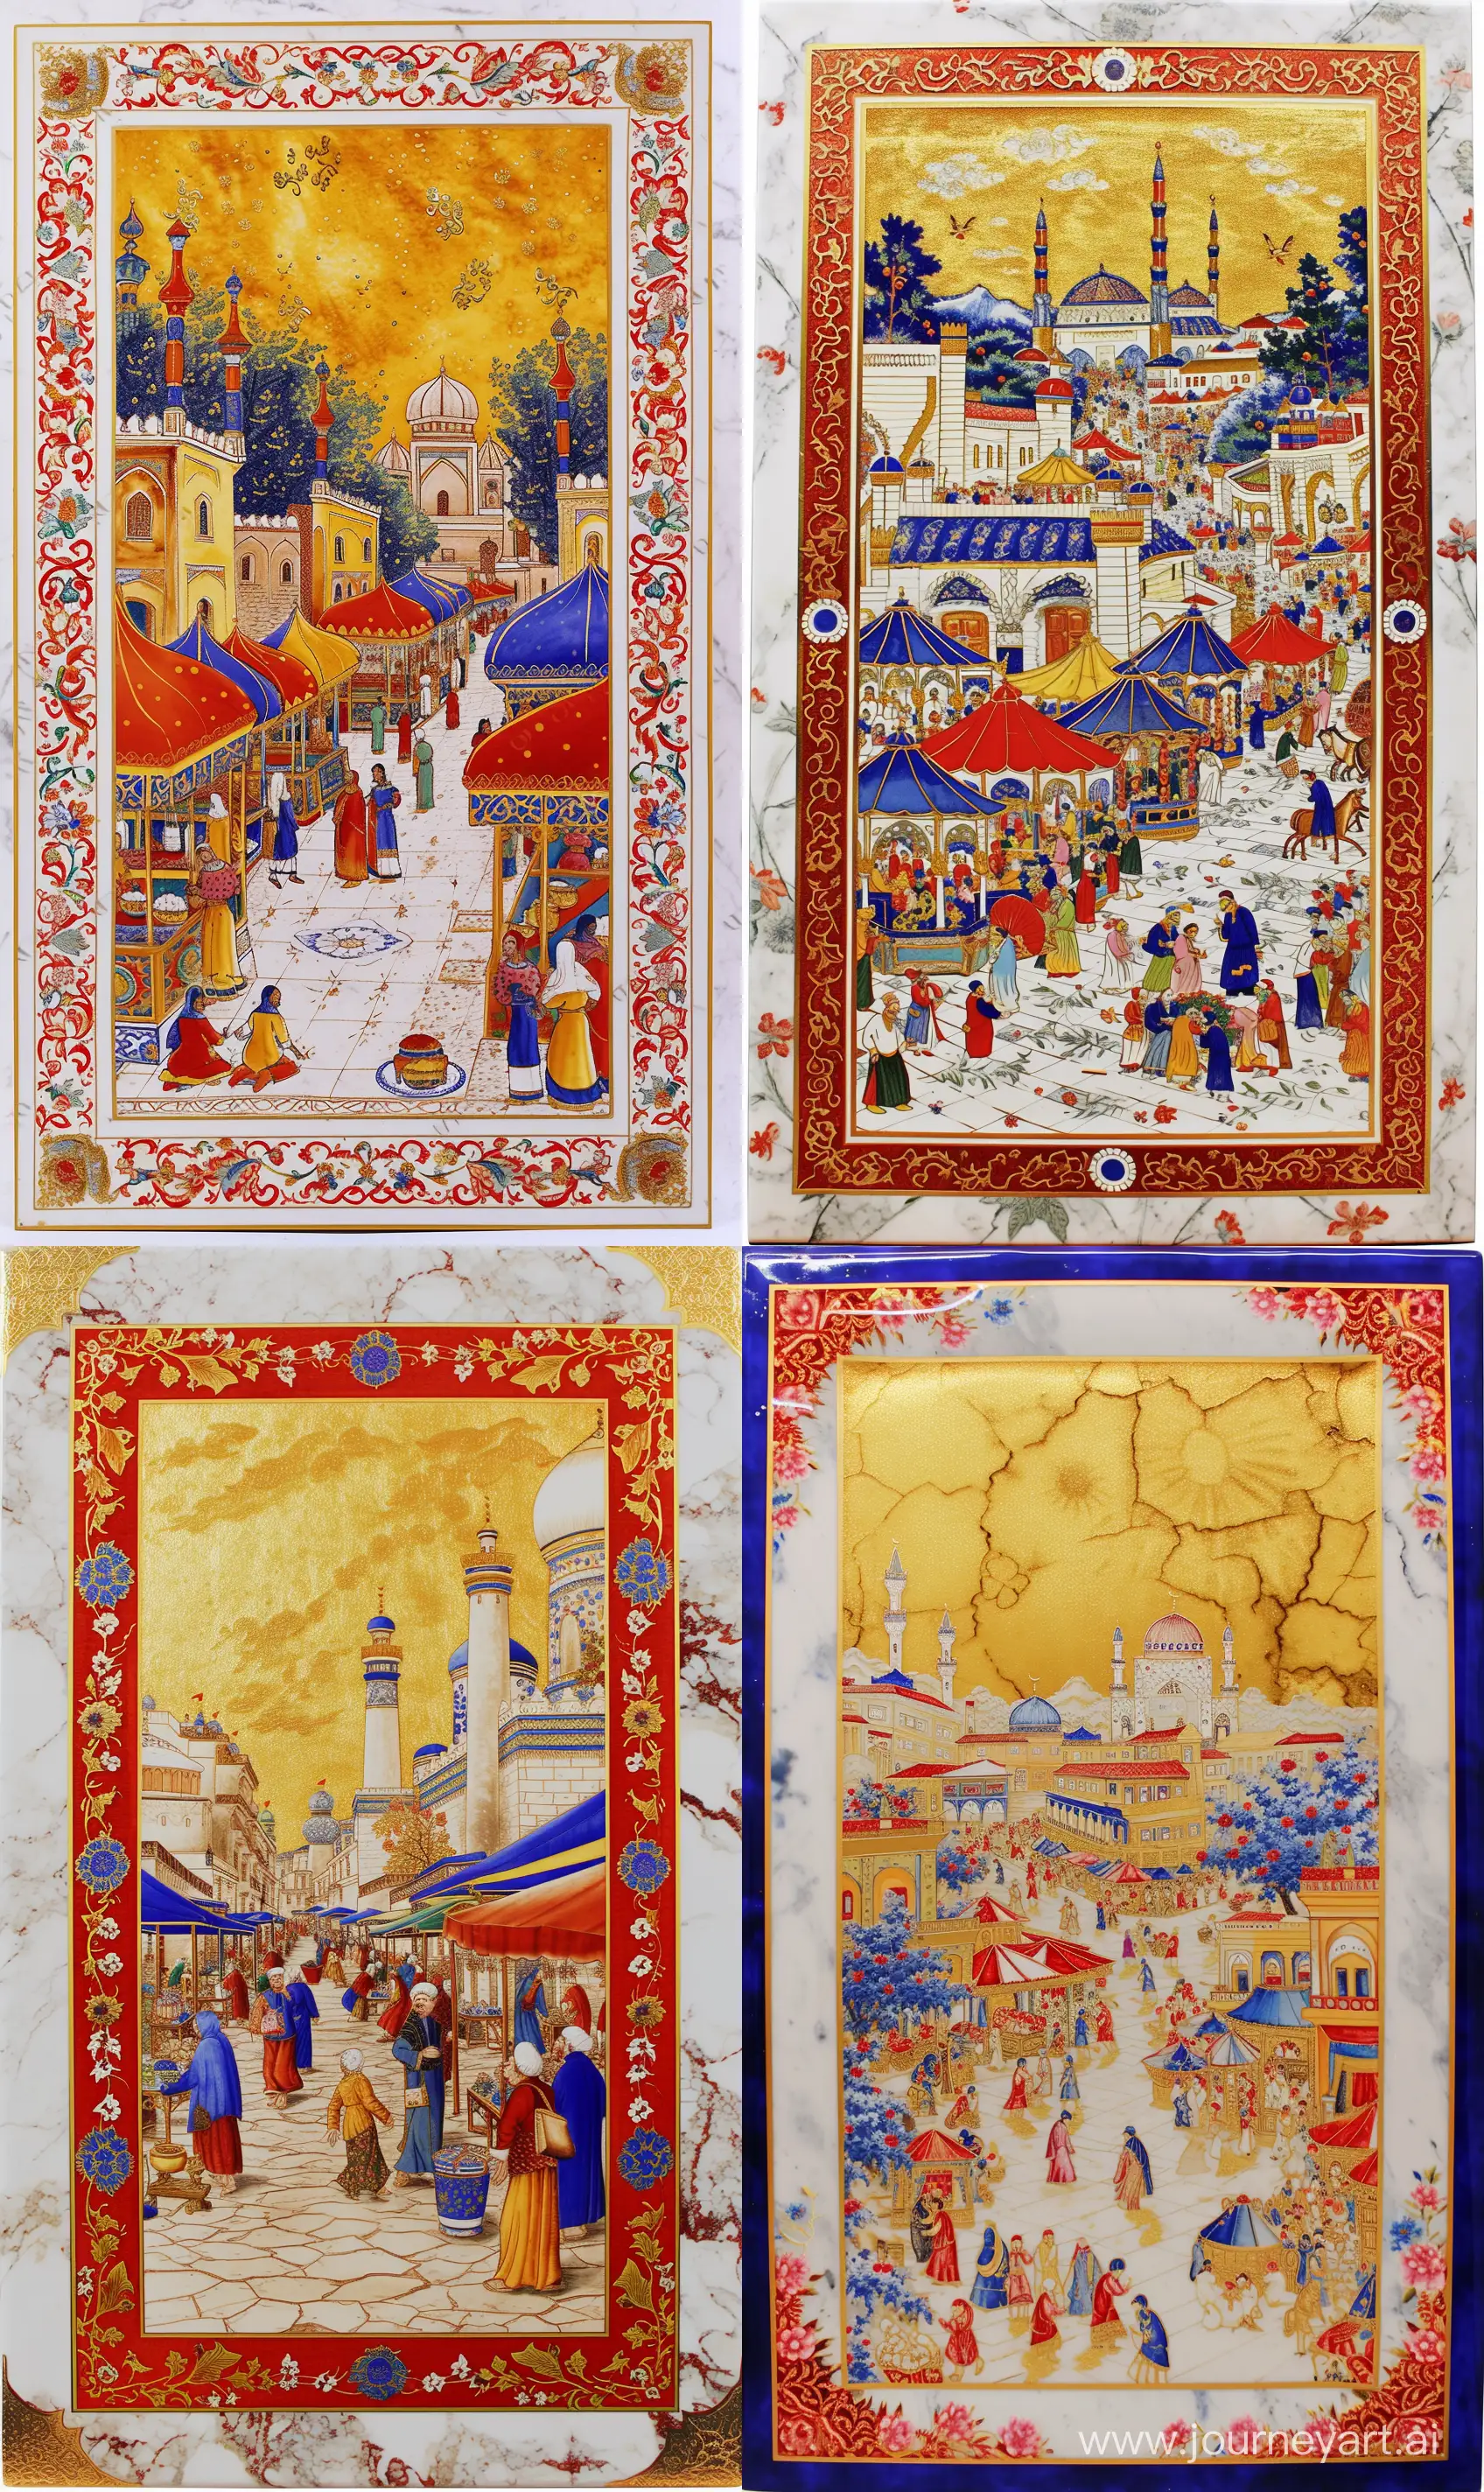 a solid iznik porcelain panel, depicting a colorful marketplace and mosque scene from a golden sky Persian miniature painting, red blue 3d embossed persian floral arabesque on white marbled border around porcelain, shiny gold outlines --ar 3:5 --v 6